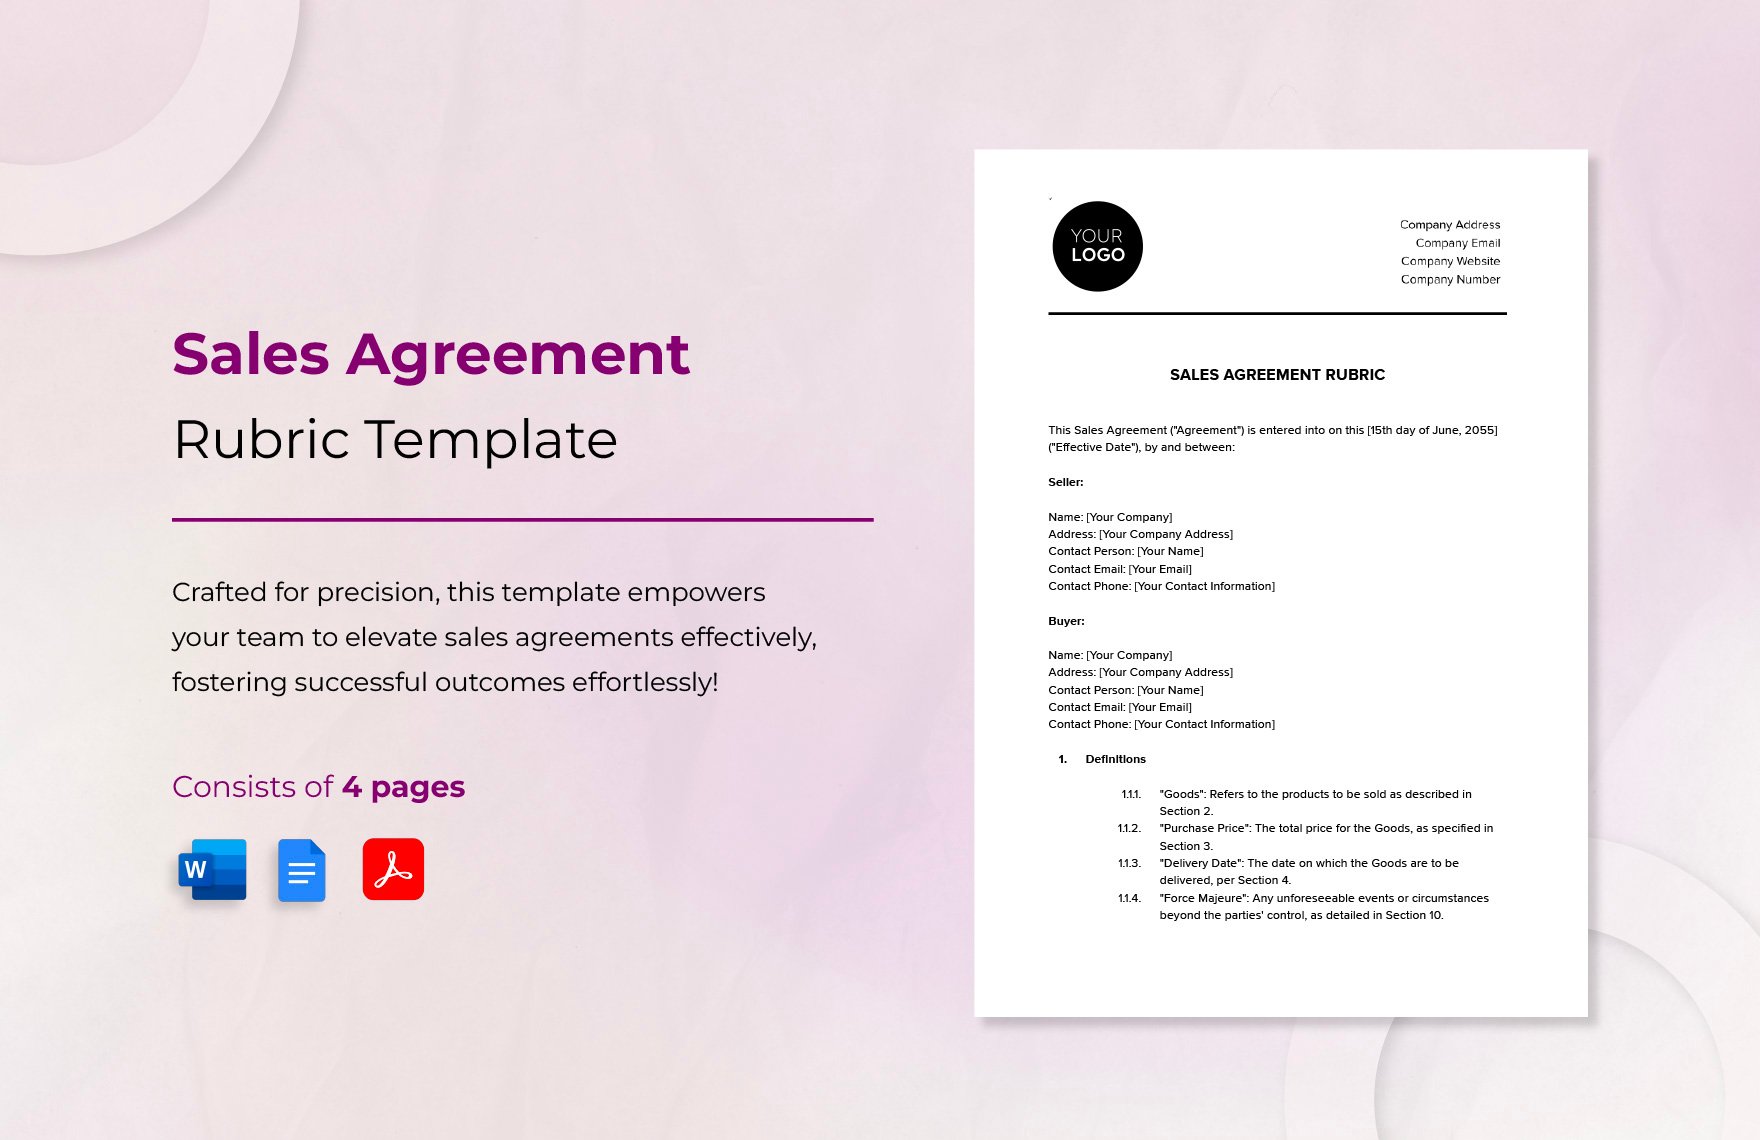 Sales Agreement Rubric Template in Word, Google Docs, PDF